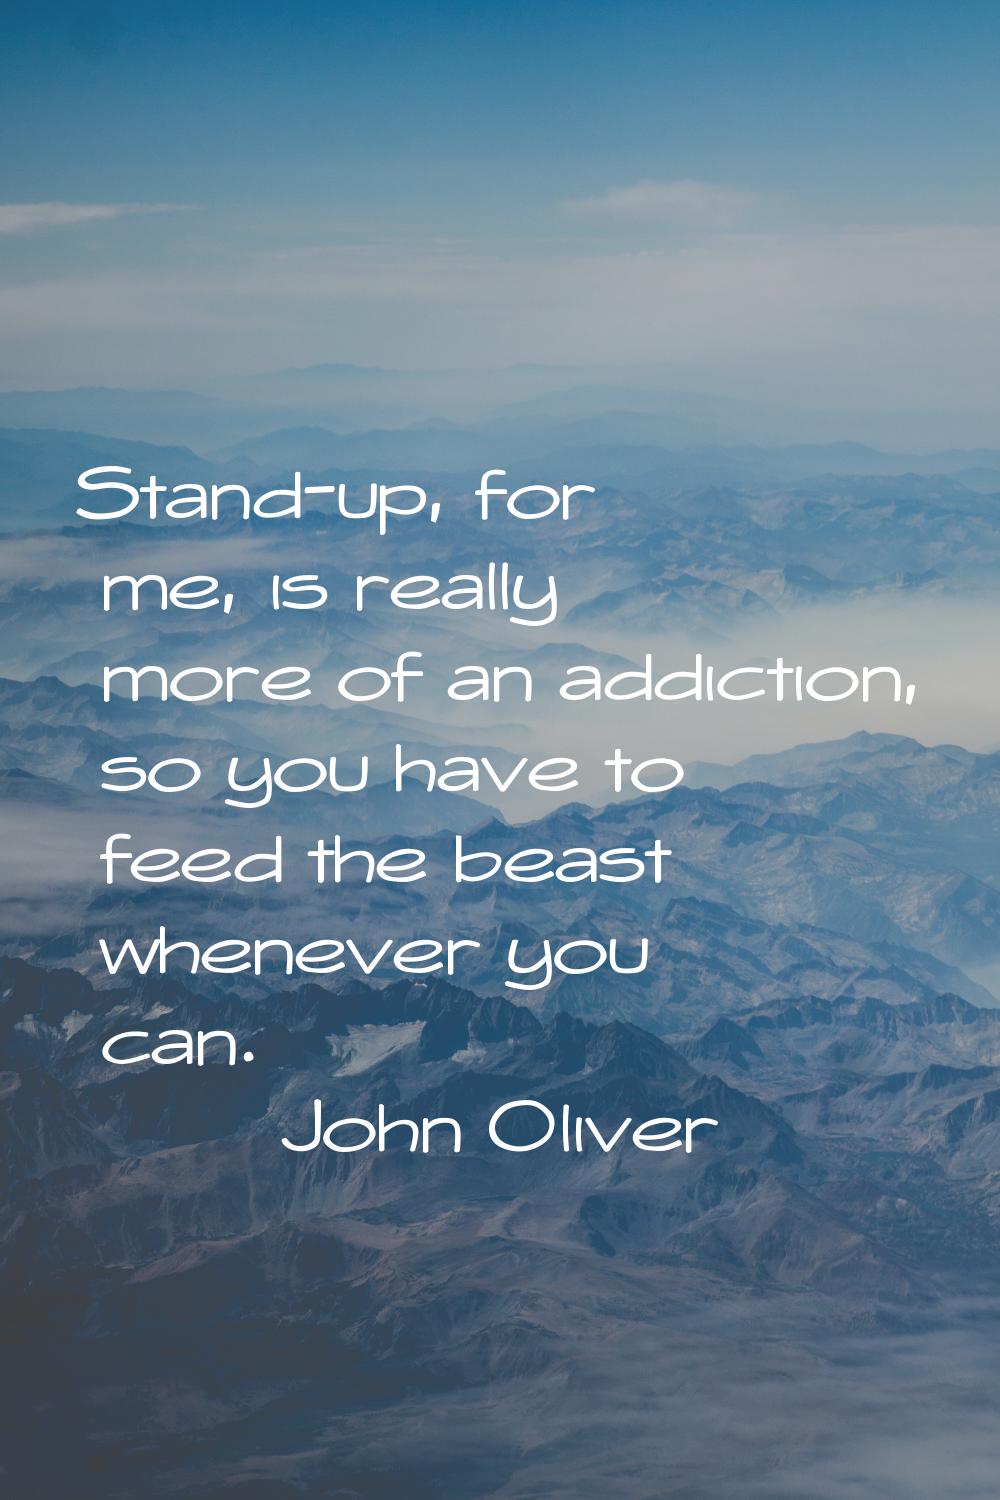 Stand-up, for me, is really more of an addiction, so you have to feed the beast whenever you can.